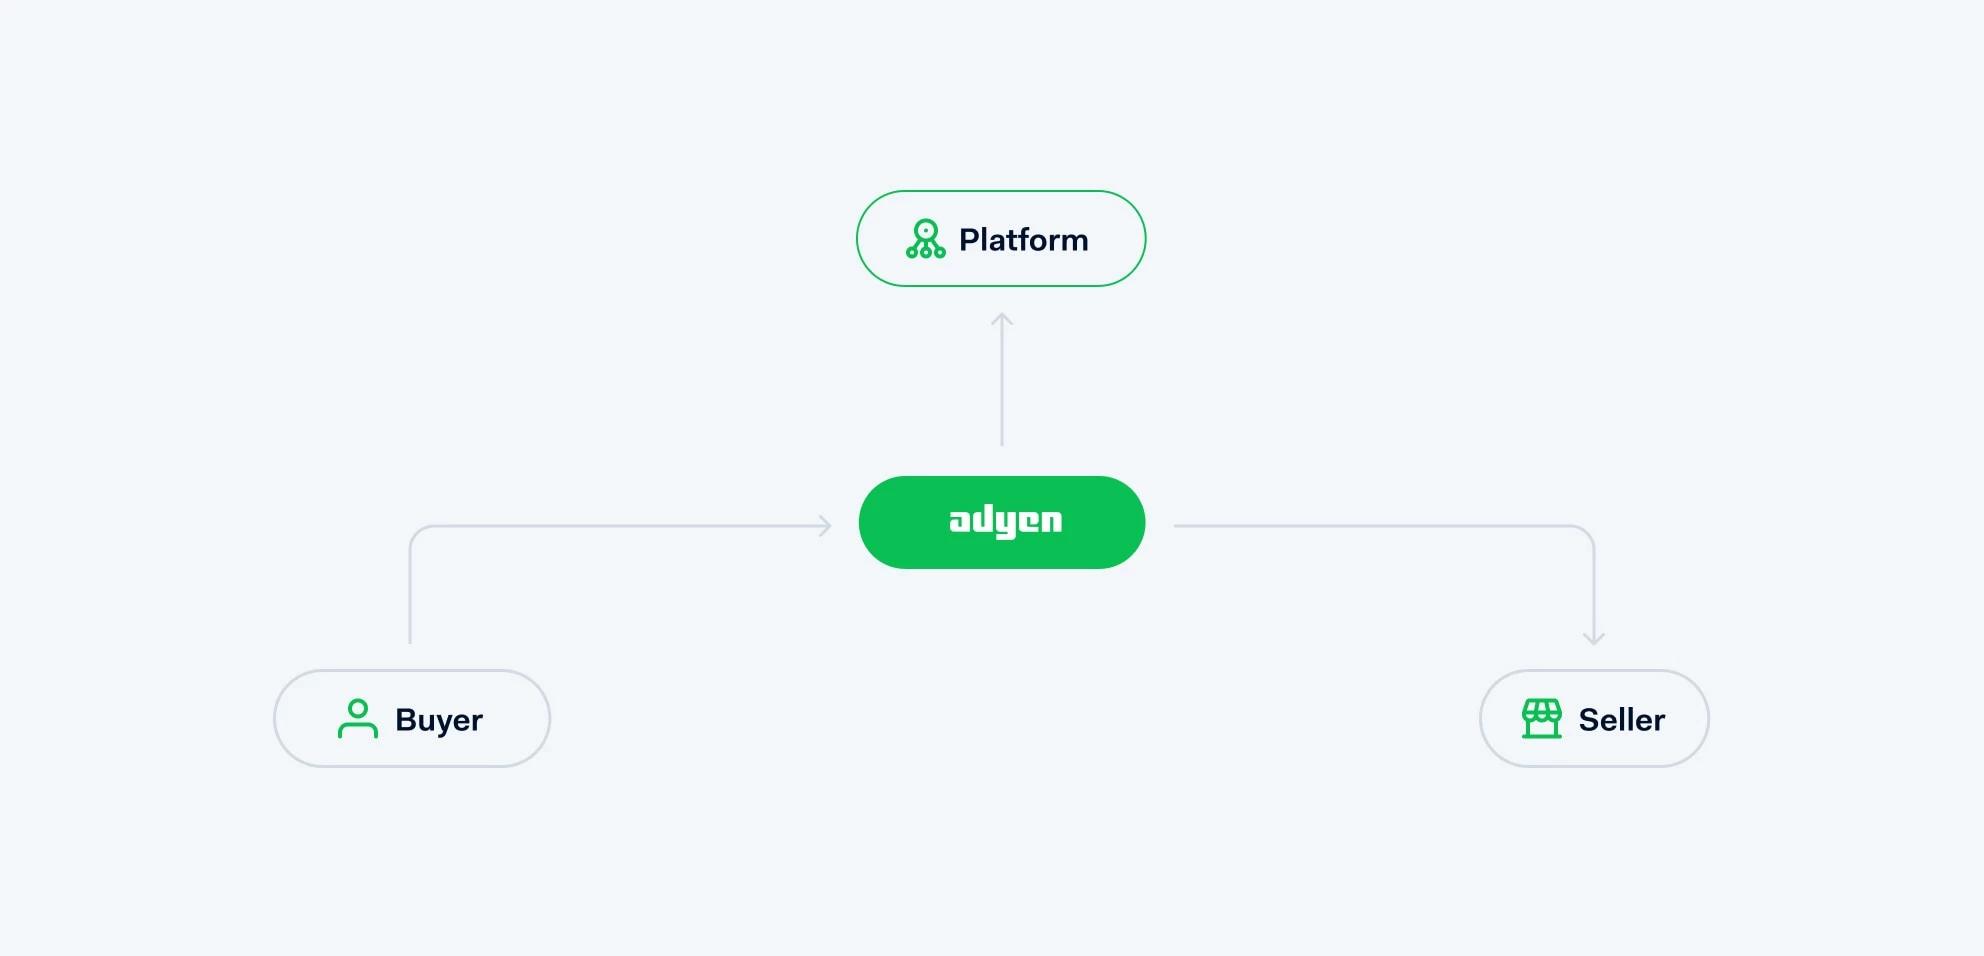 funds from from buyer to Adyen, and from Adyen to the Platform and Seller